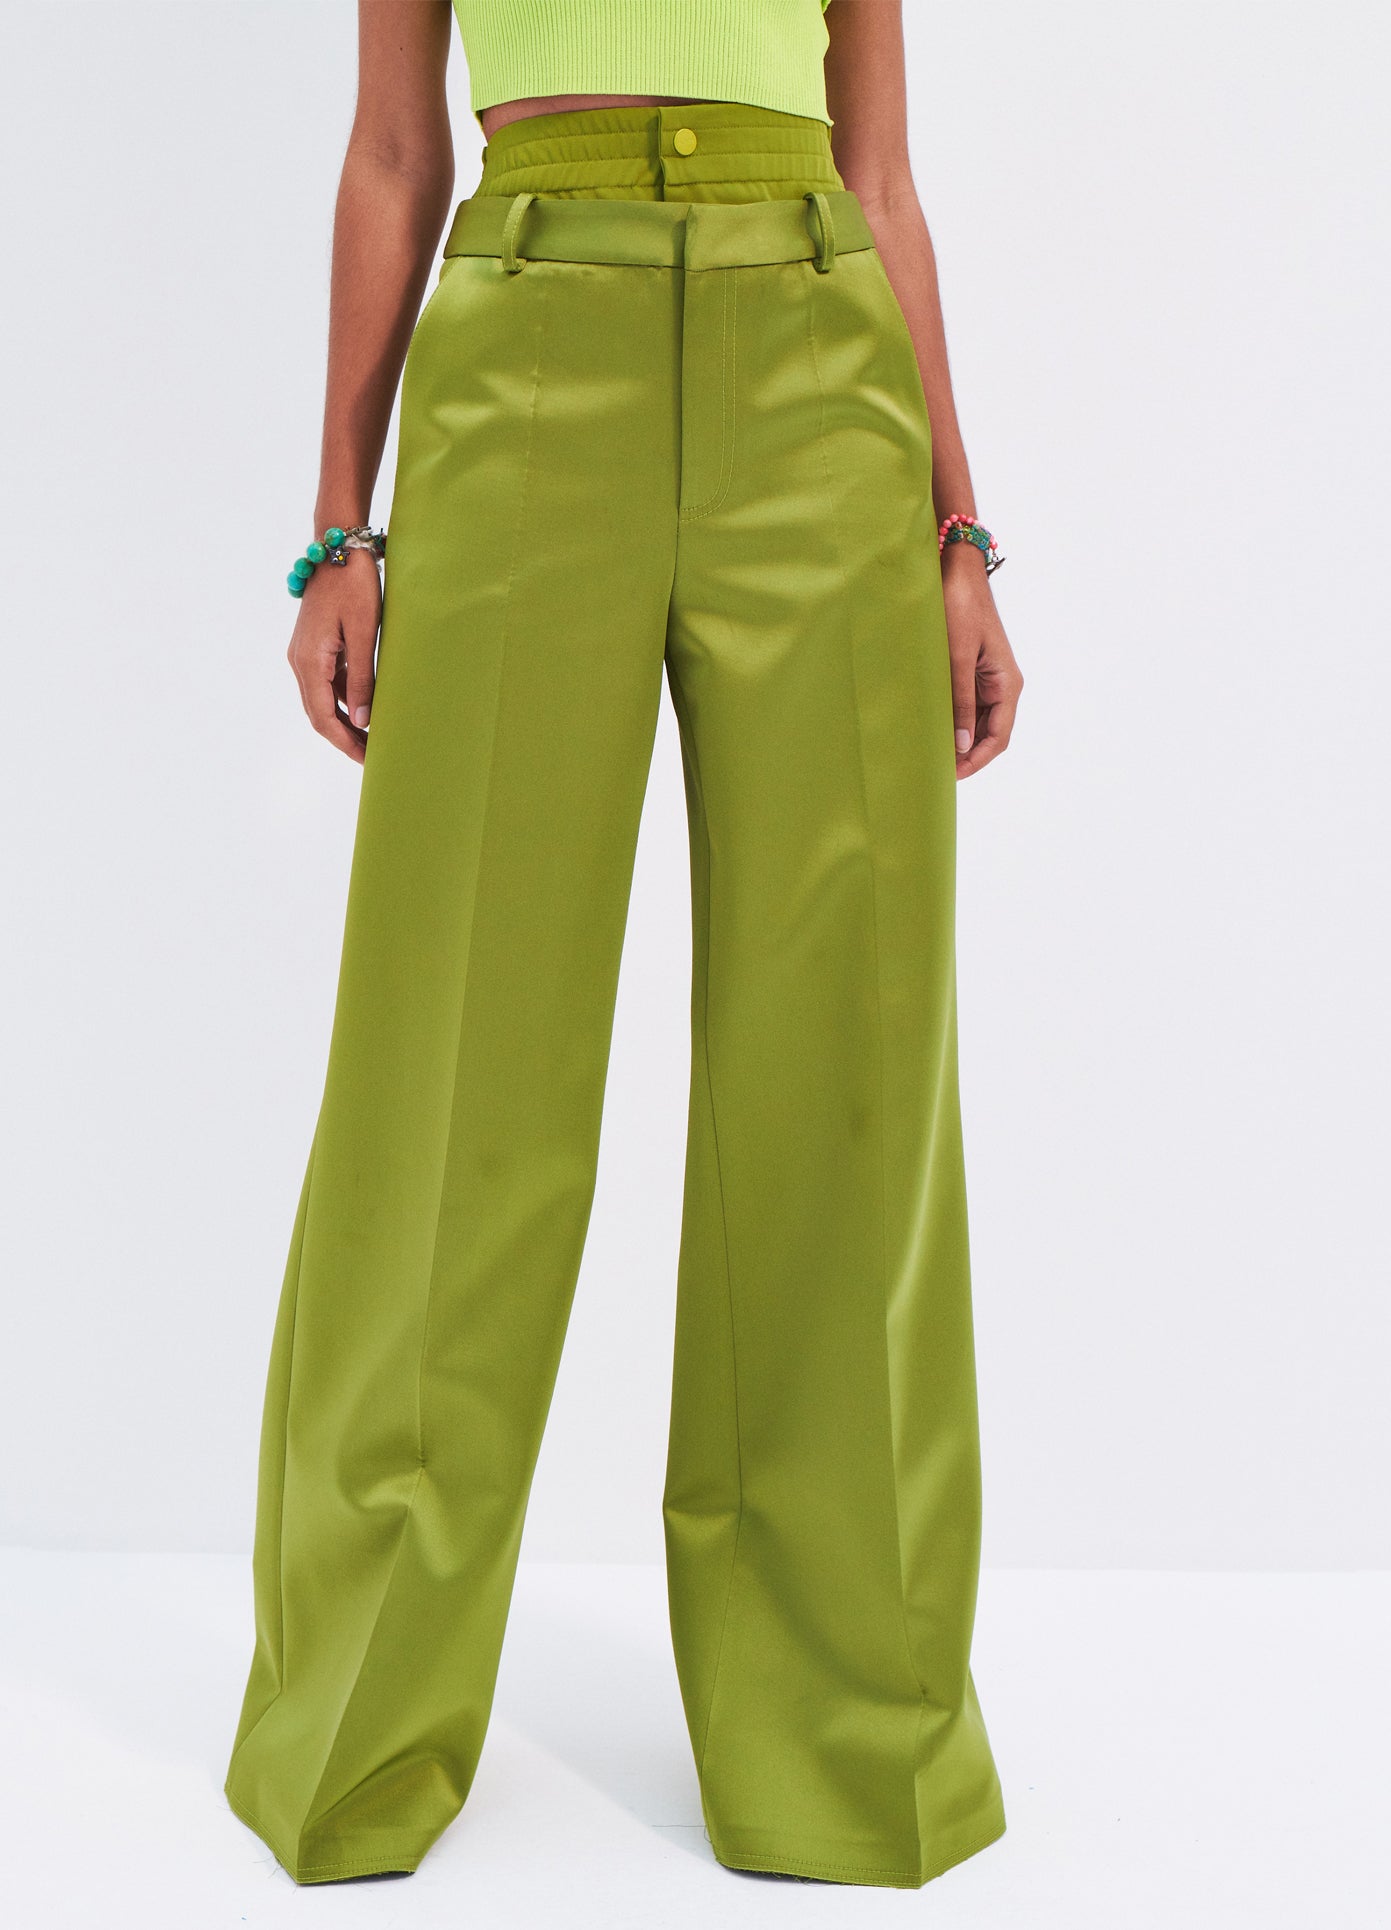 MONSE Satin Double Waistband Wide Leg Trousers in Olive on model front detail view